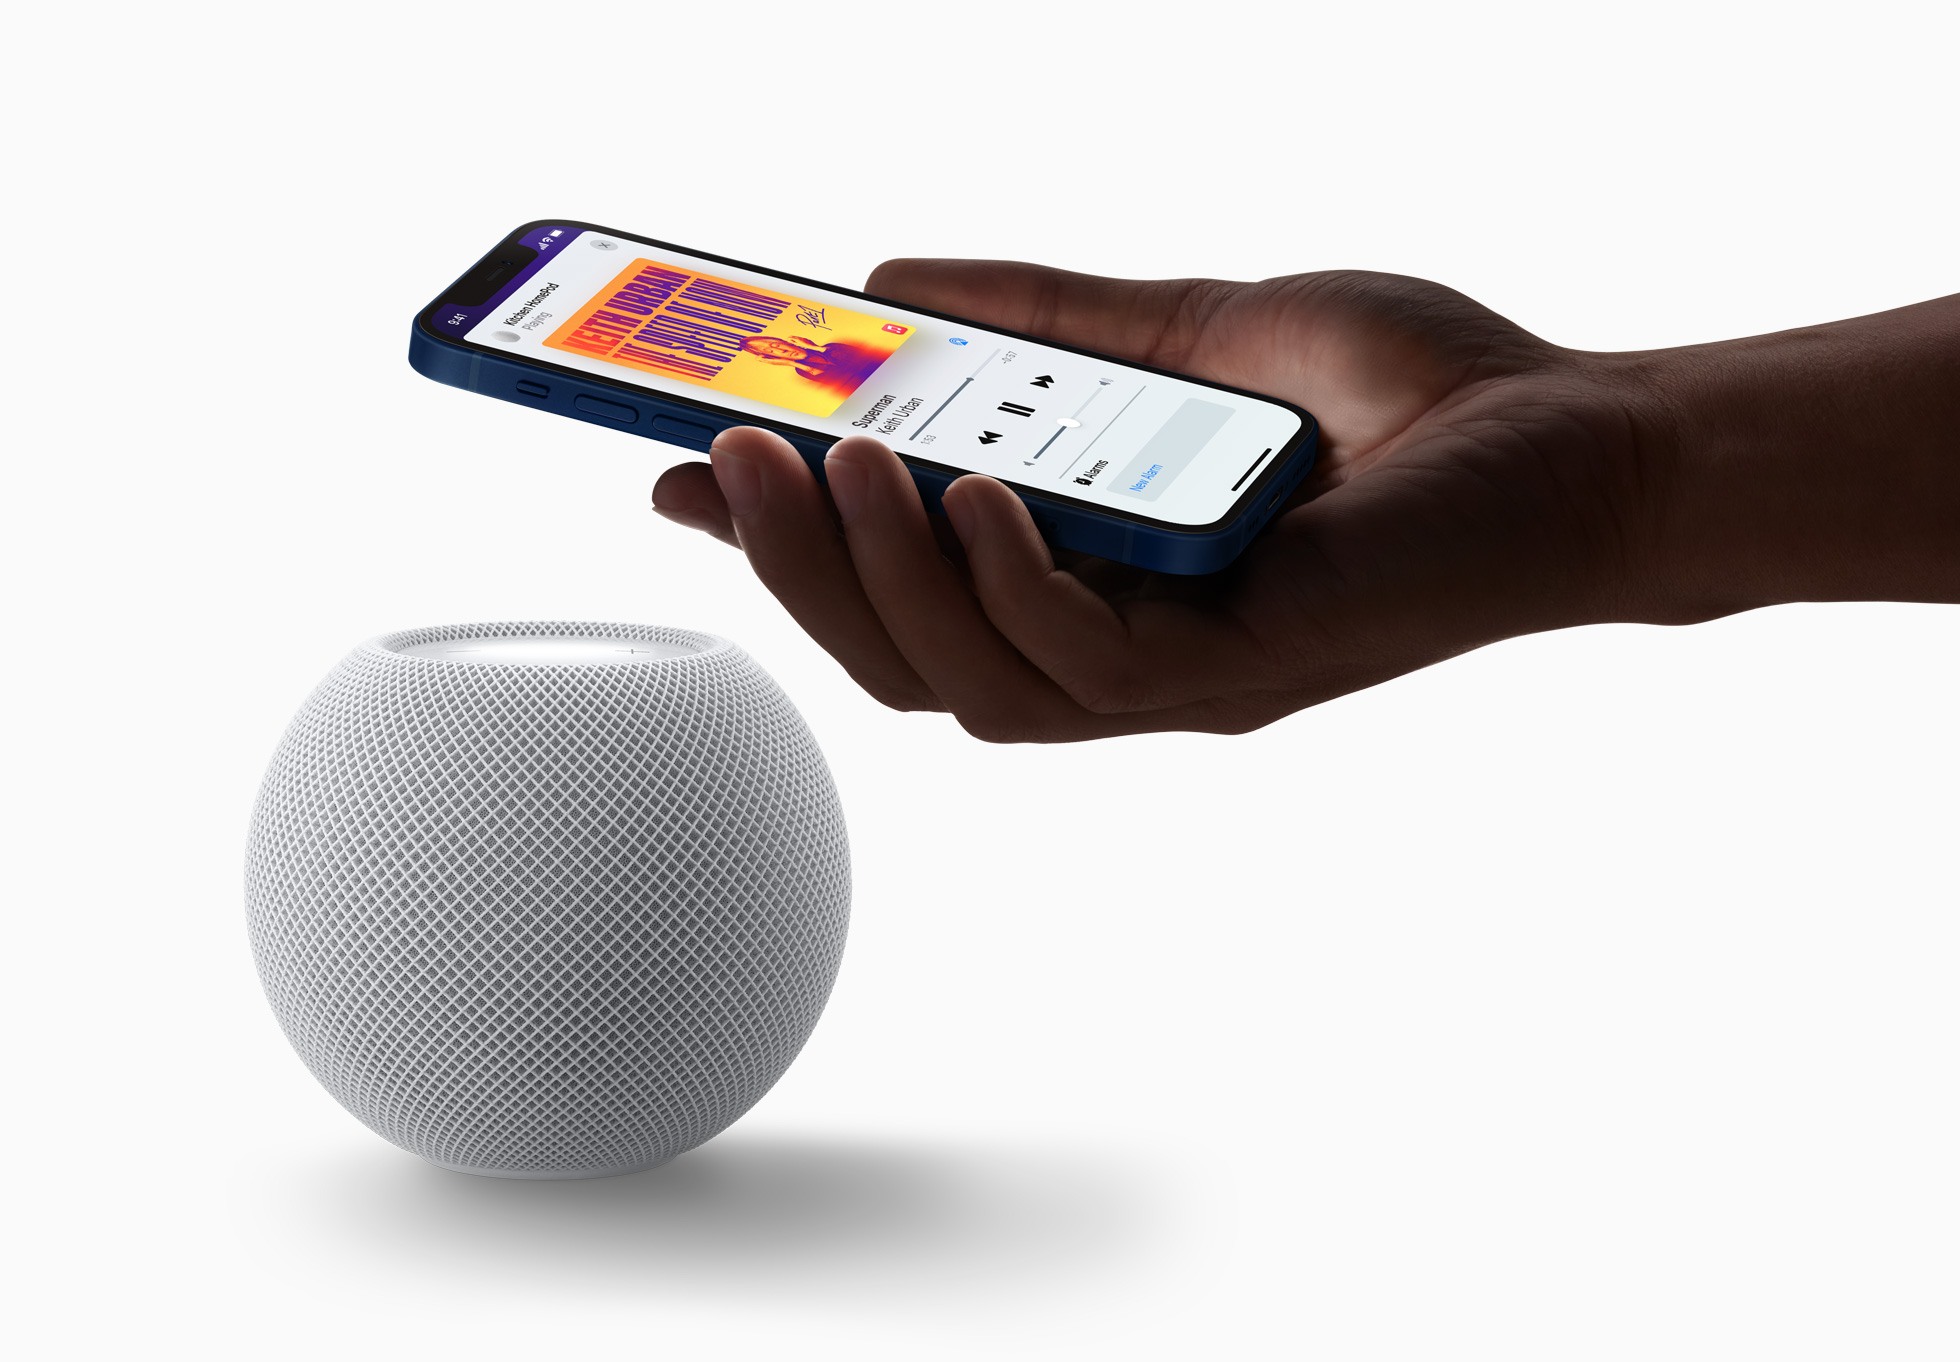 Music and other audio can be transferred to and from a HomePod mini using Handoff.